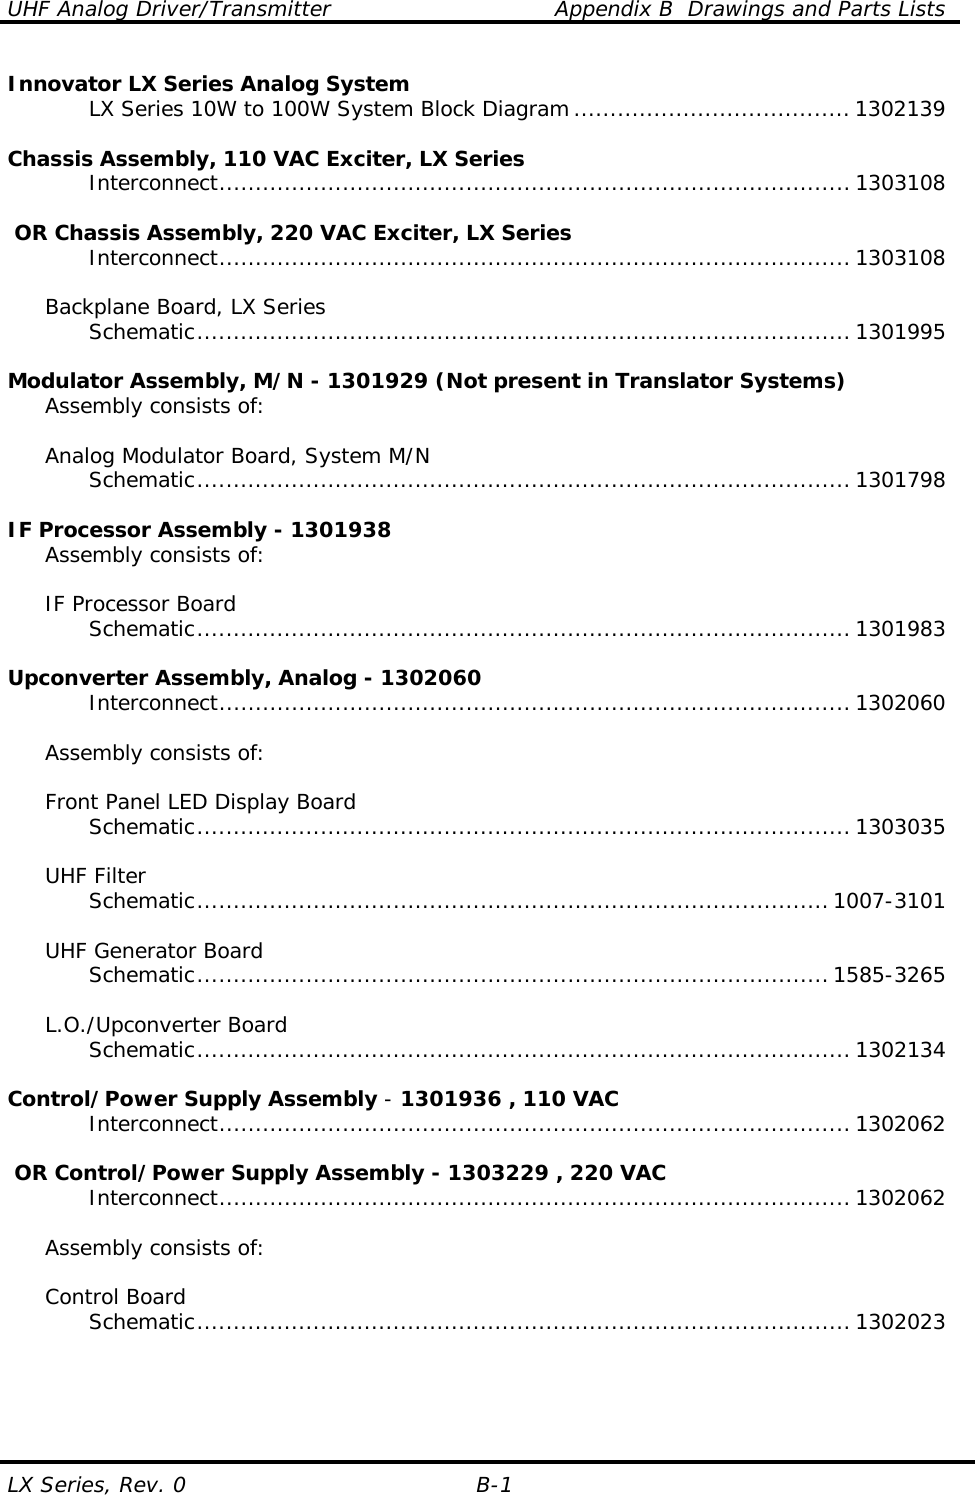 UHF Analog Driver/Transmitter    Appendix B  Drawings and Parts Lists LX Series, Rev. 0  B-1 Innovator LX Series Analog System     LX Series 10W to 100W System Block Diagram ...................................... 1302139      Chassis Assembly, 110 VAC Exciter, LX Series    Interconnect....................................................................................... 1303108      OR Chassis Assembly, 220 VAC Exciter, LX Series    Interconnect....................................................................................... 1303108       Backplane Board, LX Series    Schematic.......................................................................................... 1301995     Modulator Assembly, M/N - 1301929 (Not present in Translator Systems)   Assembly consists of:    Analog Modulator Board, System M/N    Schematic.......................................................................................... 1301798     IF Processor Assembly - 1301938   Assembly consists of:    IF Processor Board    Schematic.......................................................................................... 1301983     Upconverter Assembly, Analog - 1302060    Interconnect....................................................................................... 1302060       Assembly consists of:    Front Panel LED Display Board    Schematic.......................................................................................... 1303035      UHF Filter    Schematic.......................................................................................1007-3101       UHF Generator Board    Schematic.......................................................................................1585-3265      L.O./Upconverter Board    Schematic.......................................................................................... 1302134   Control/Power Supply Assembly - 1301936 , 110 VAC    Interconnect....................................................................................... 1302062      OR Control/Power Supply Assembly - 1303229 , 220 VAC    Interconnect....................................................................................... 1302062       Assembly consists of:   Control Board    Schematic.......................................................................................... 1302023       